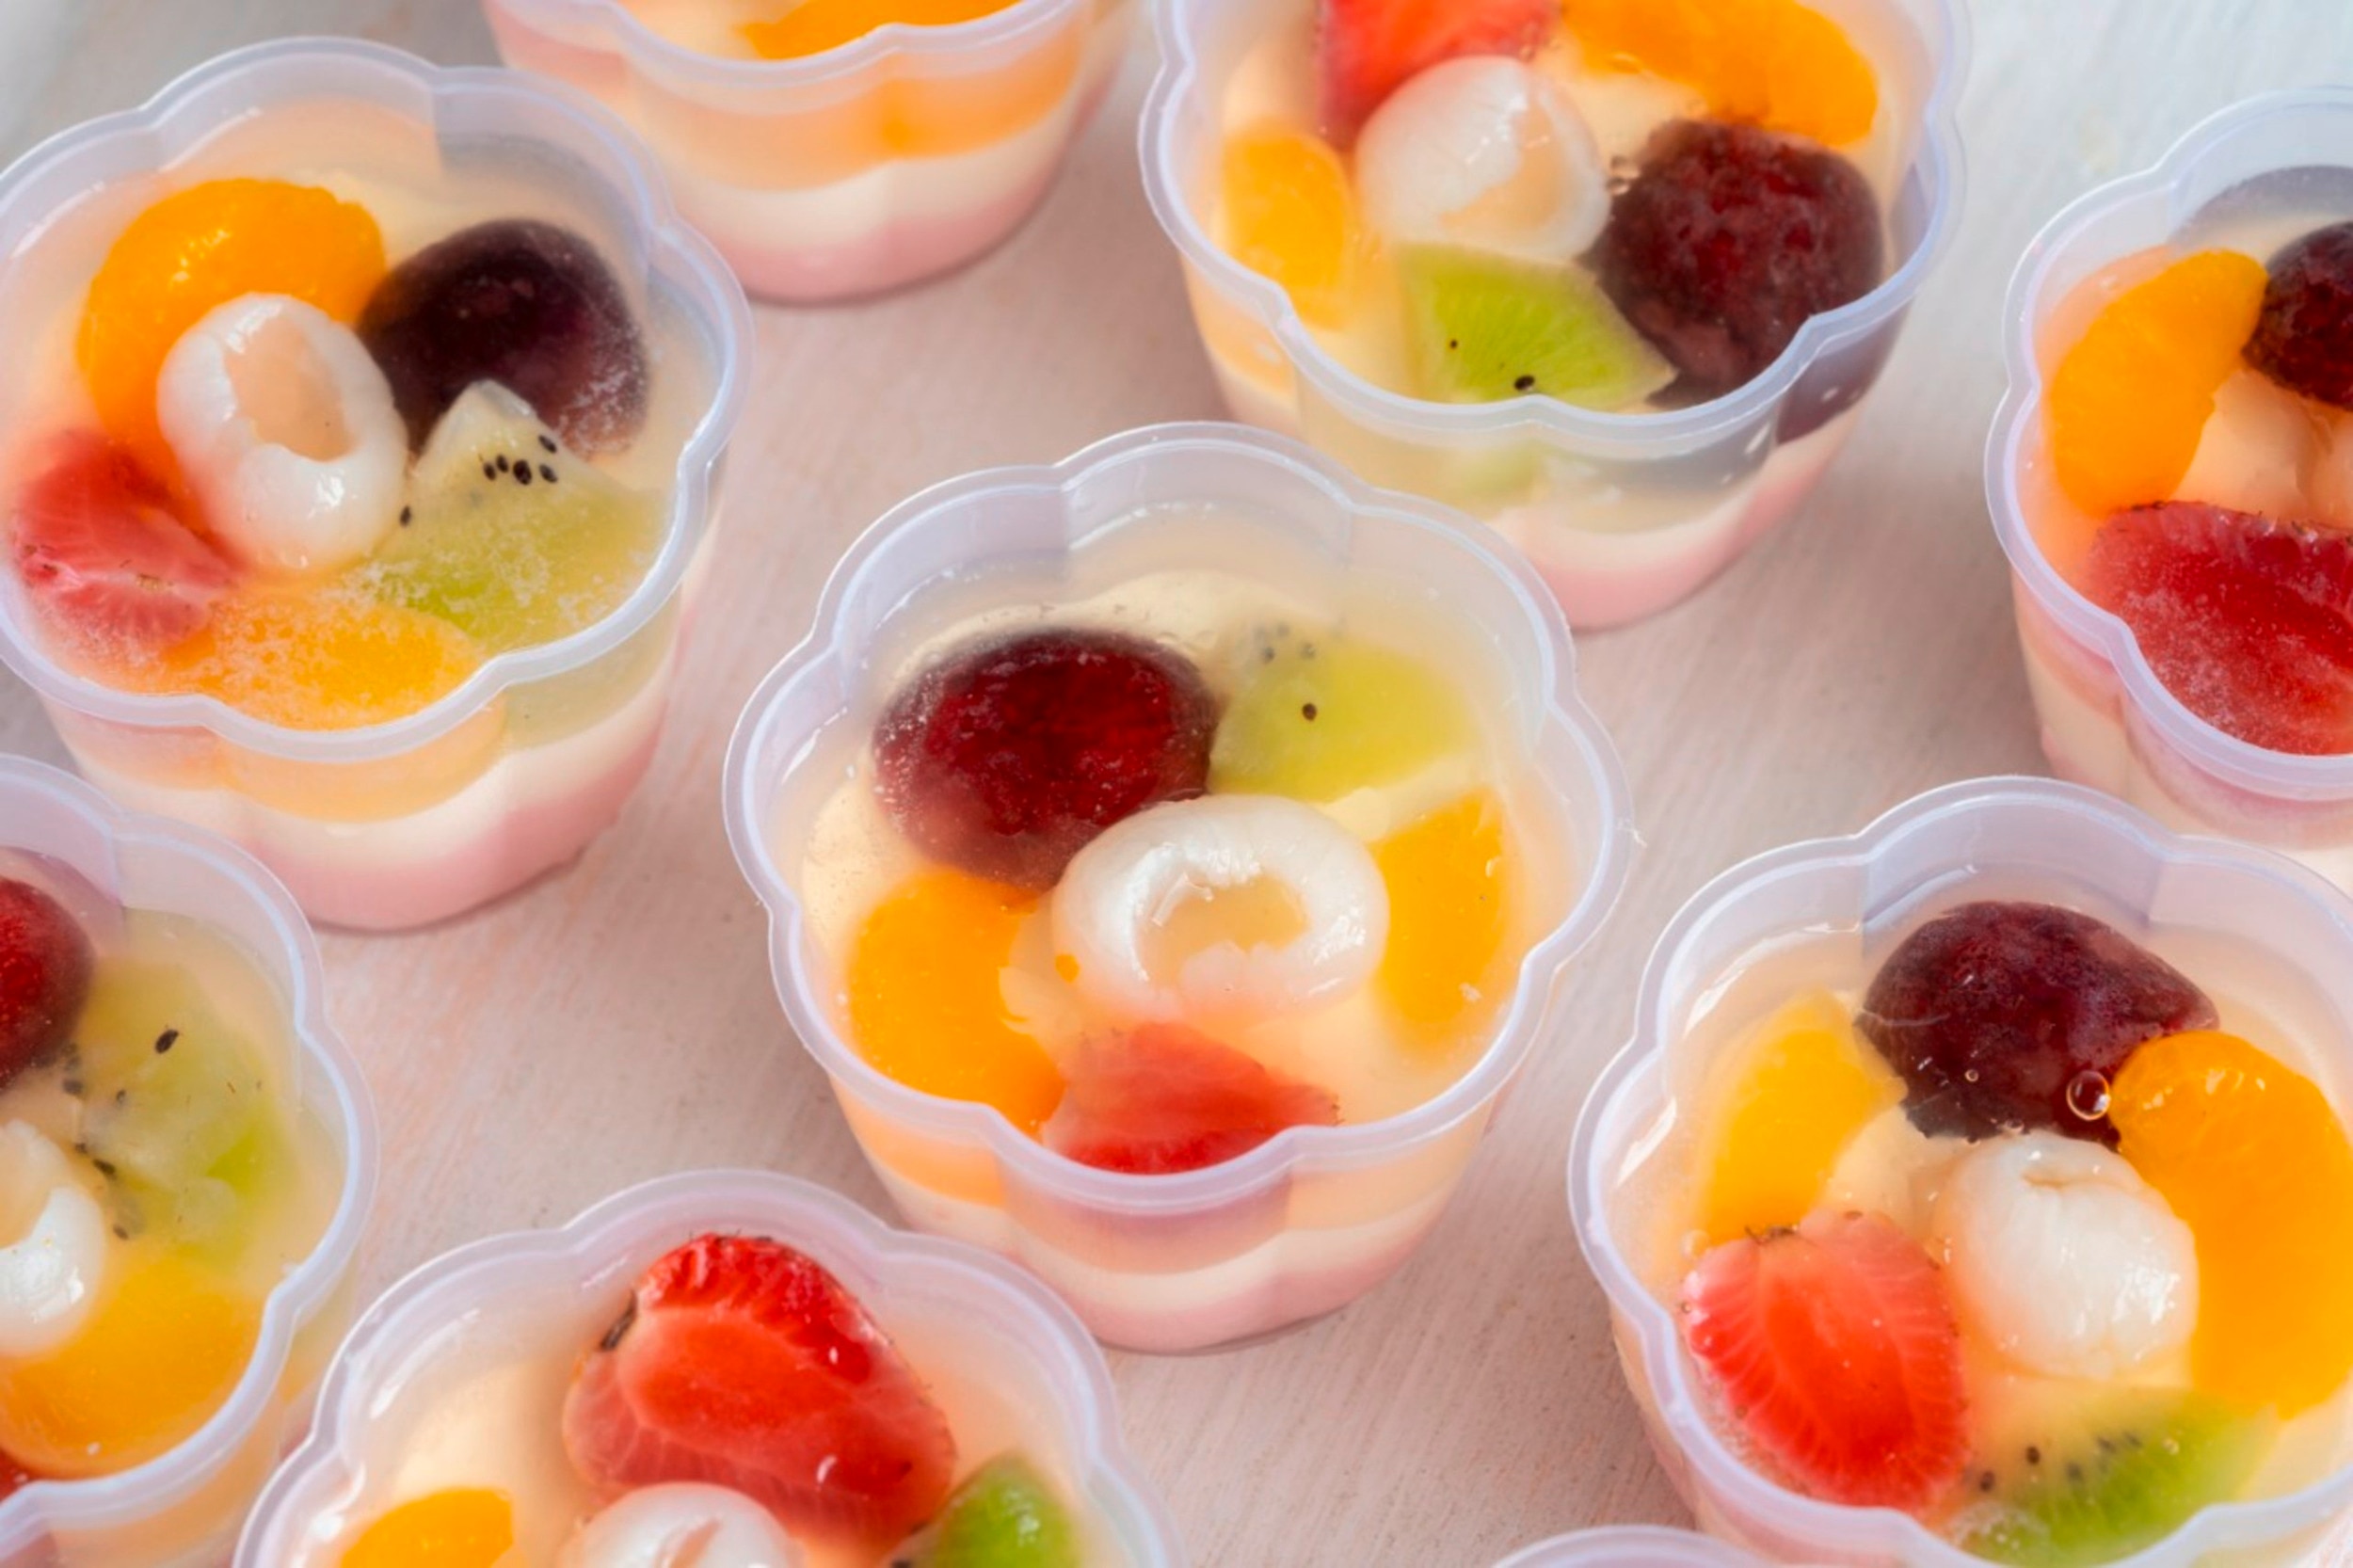 Individual serving cups of crema de fruta topped with strawberries, lychees, kiwis, and oranges